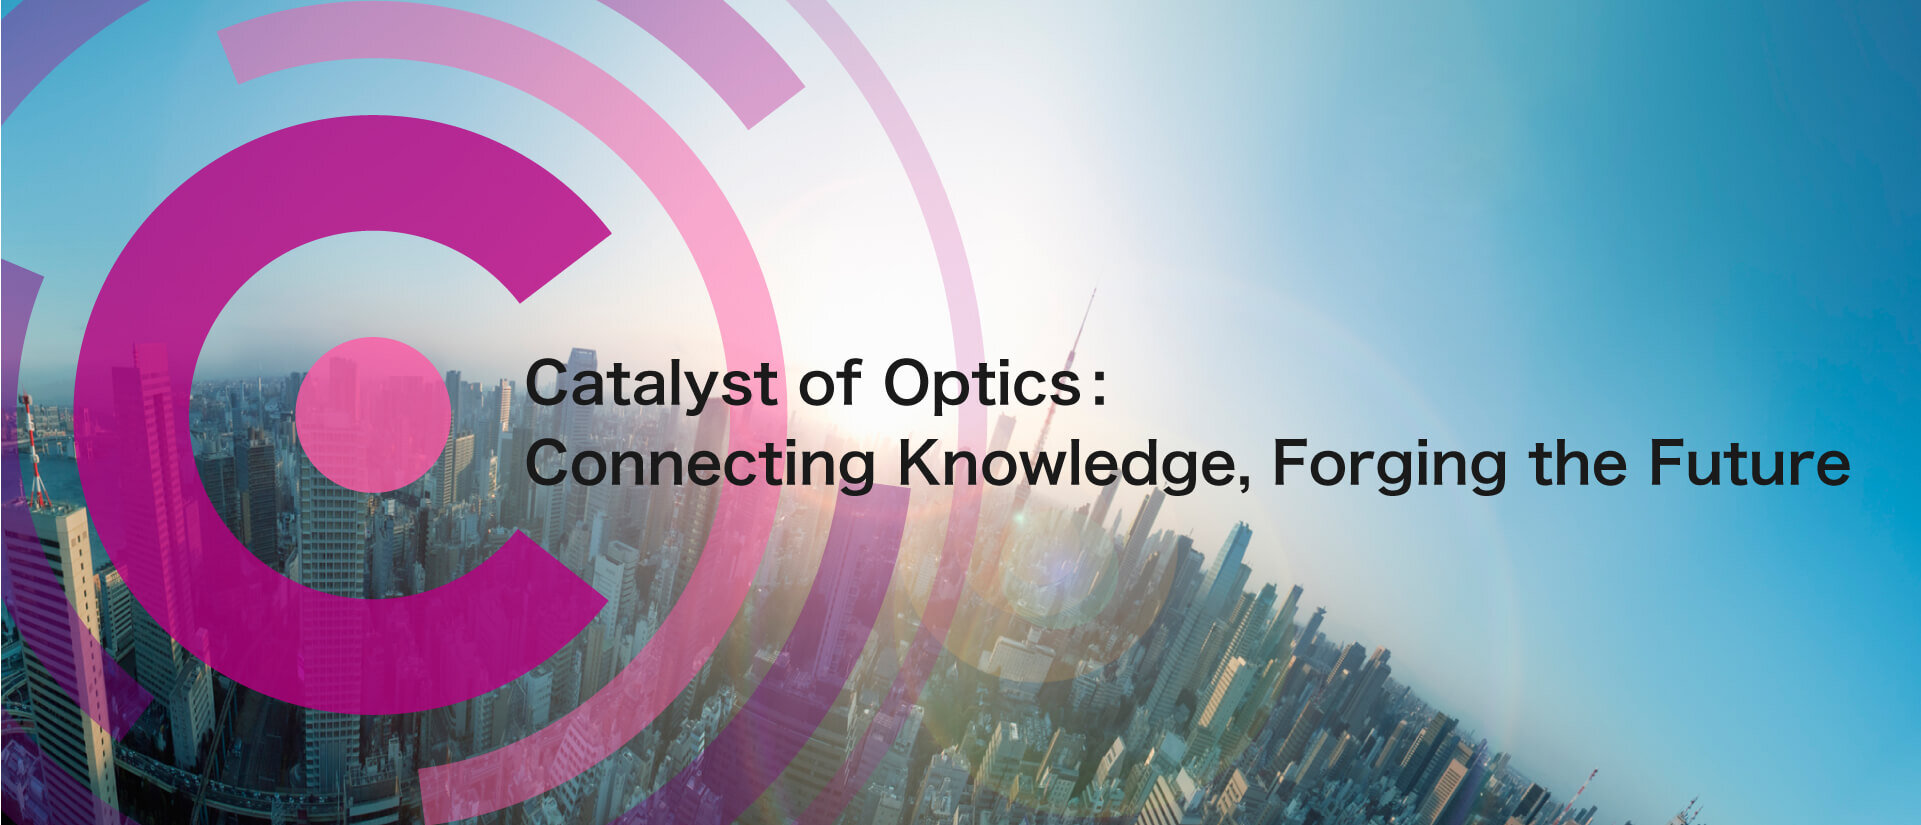 Catalyst of Optics Connecting Knowledge, Forgoing the future